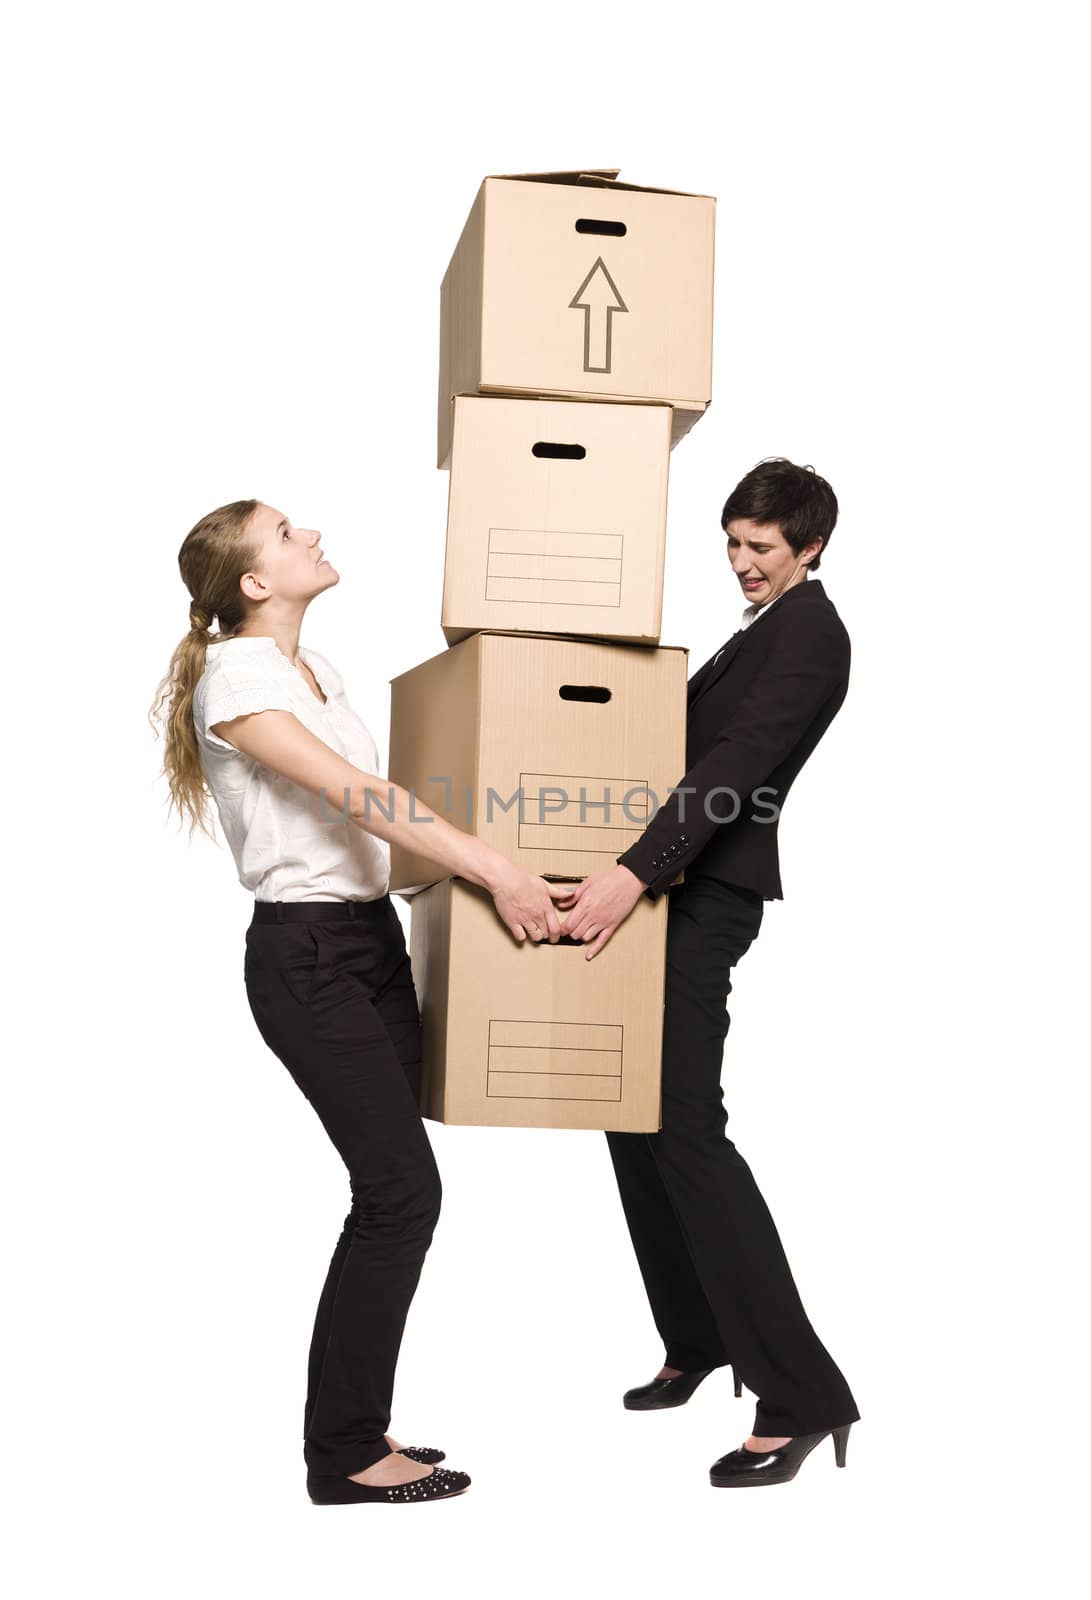 Two women carrying four boxes by gemenacom